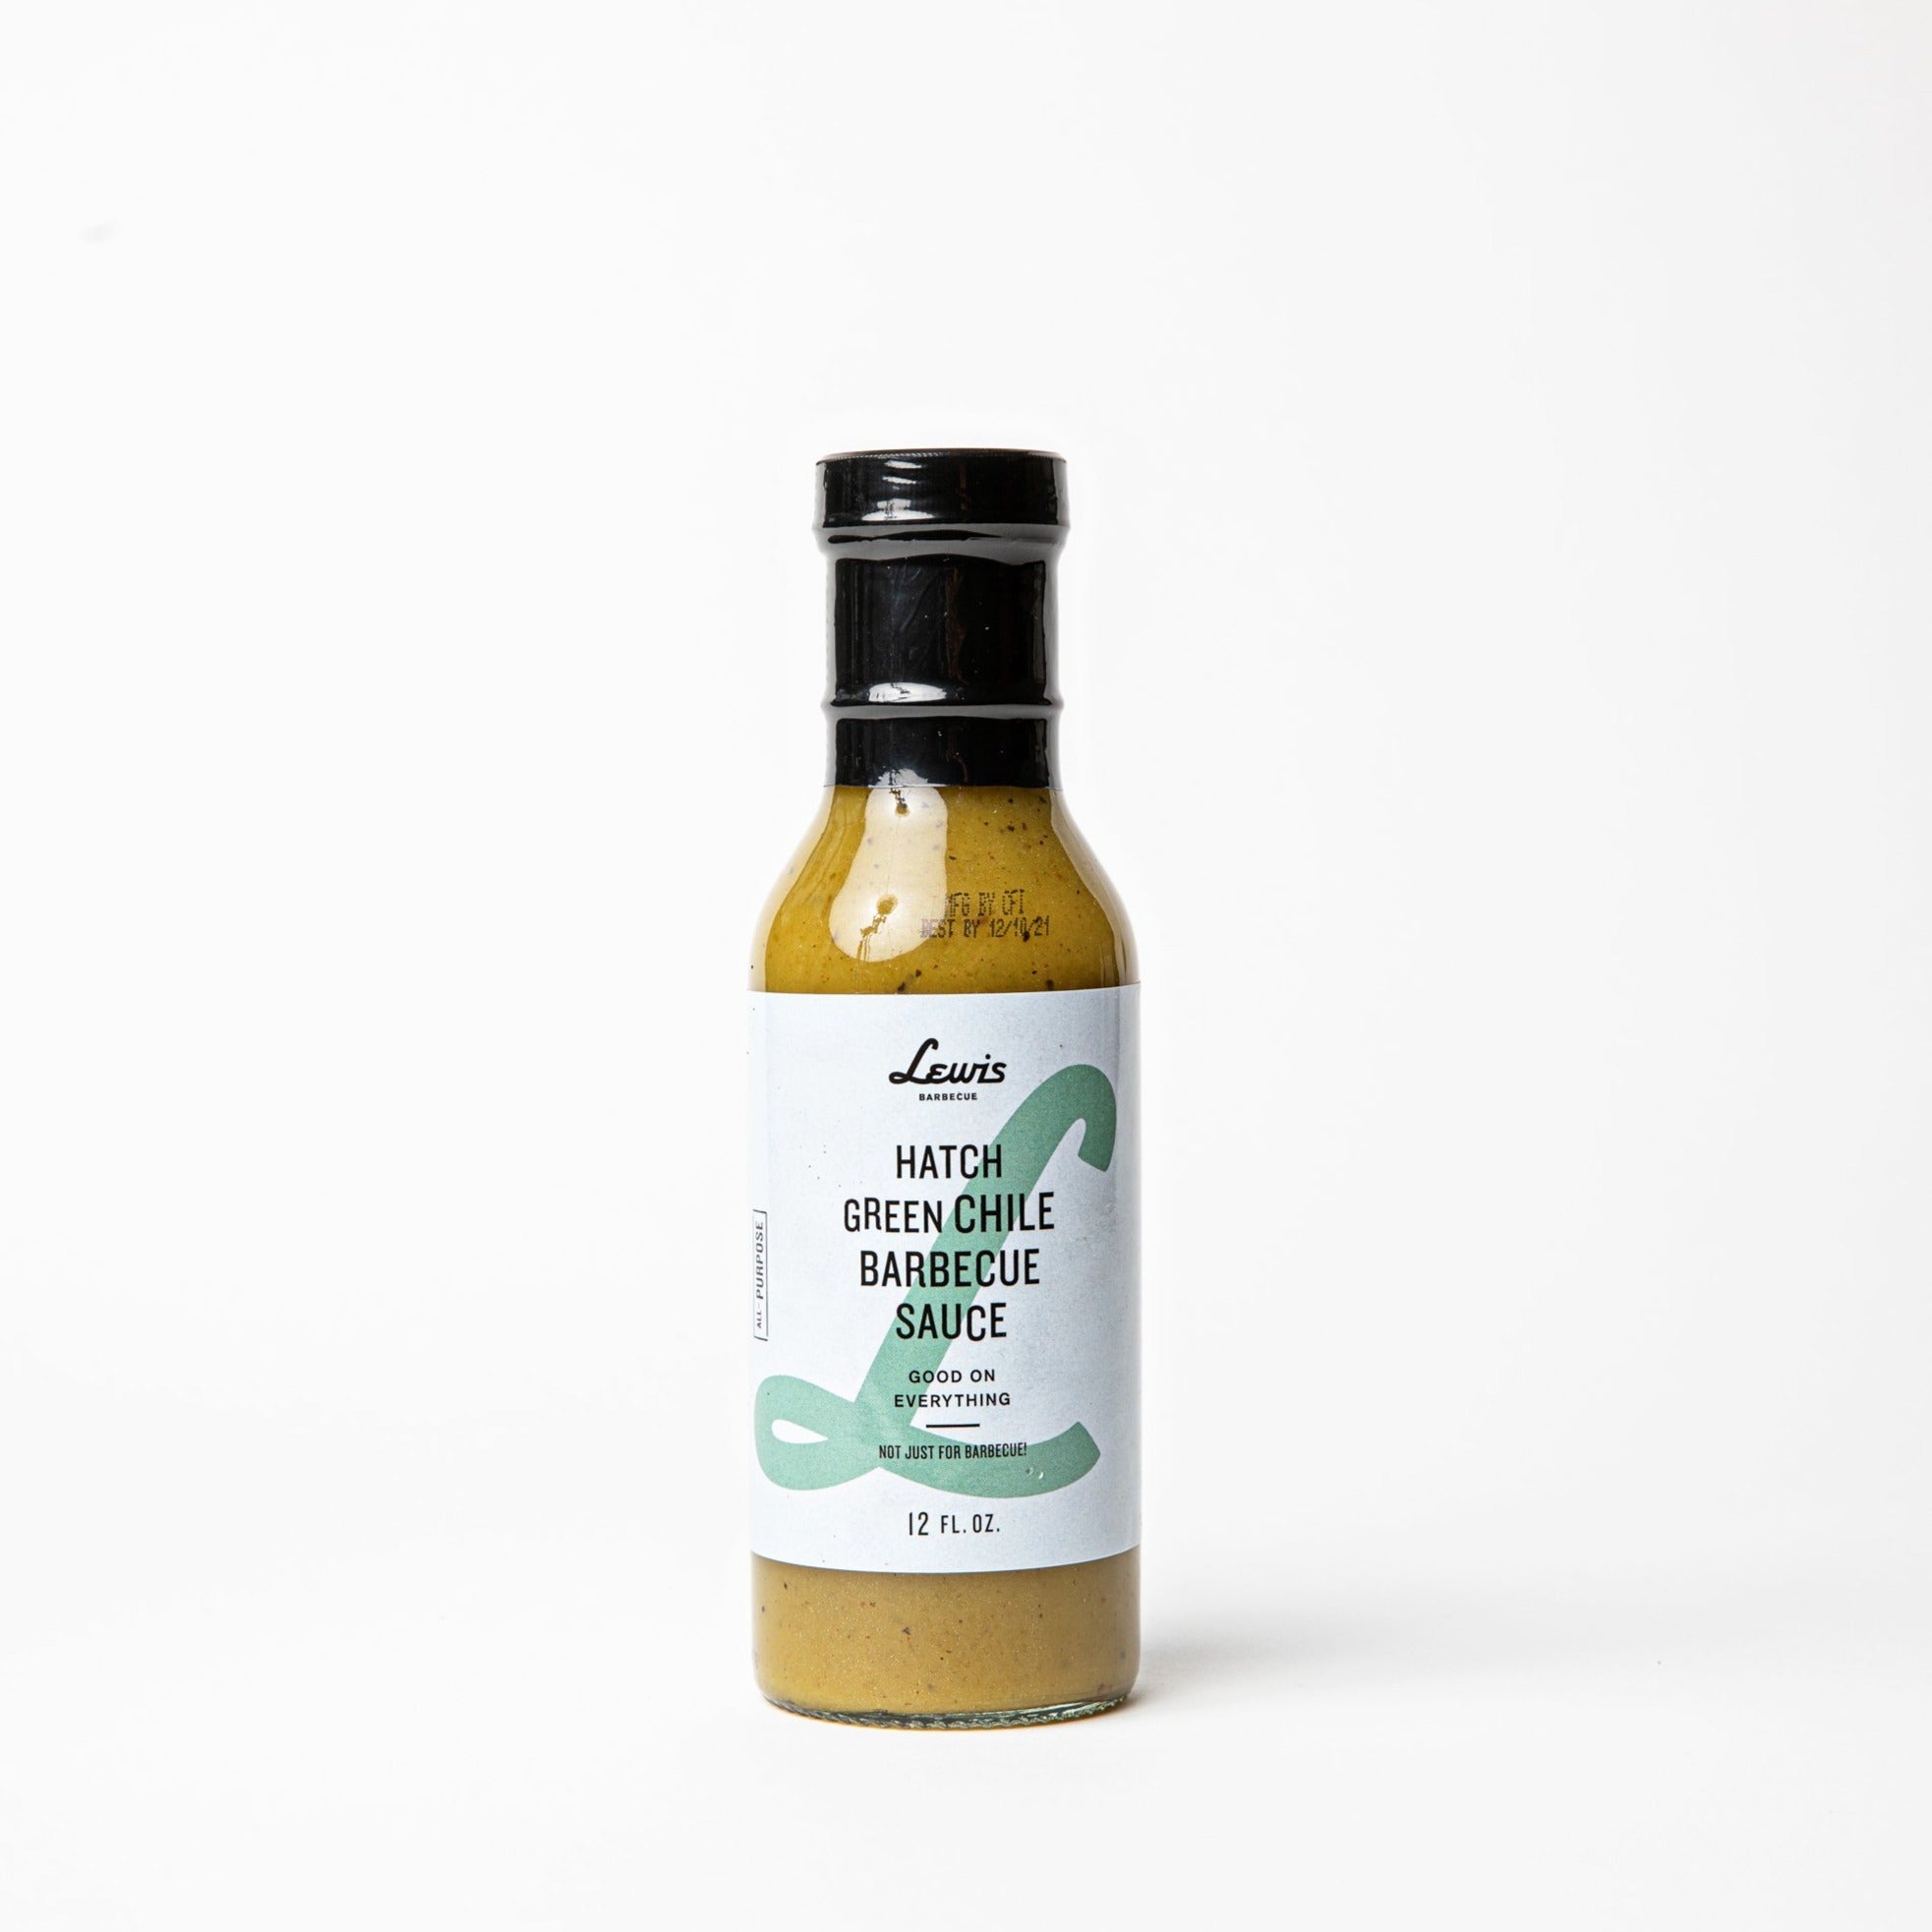 HATCH GREEN CHILE BARBECUE SAUCE